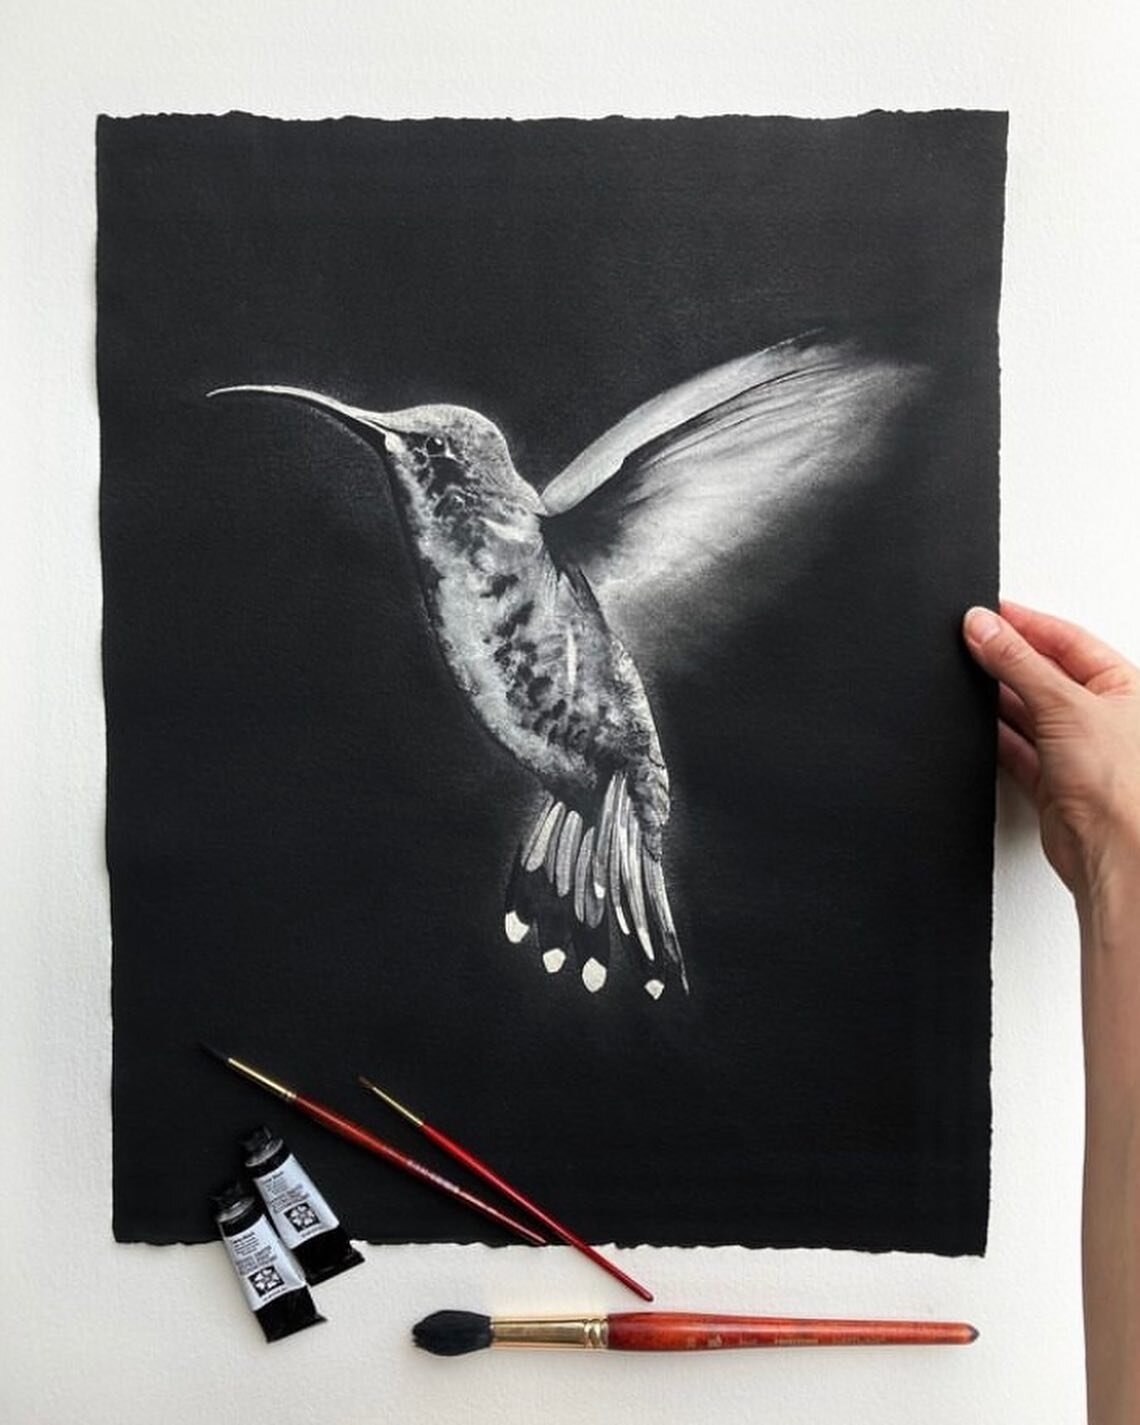 I think I broke the rules with this one. A black and white negative watercolor painting of one of the most brightly colored birds; the humble hummingbird. The idea came to me as I sighted a hummingbird in our local park and I wanted to attempt someth